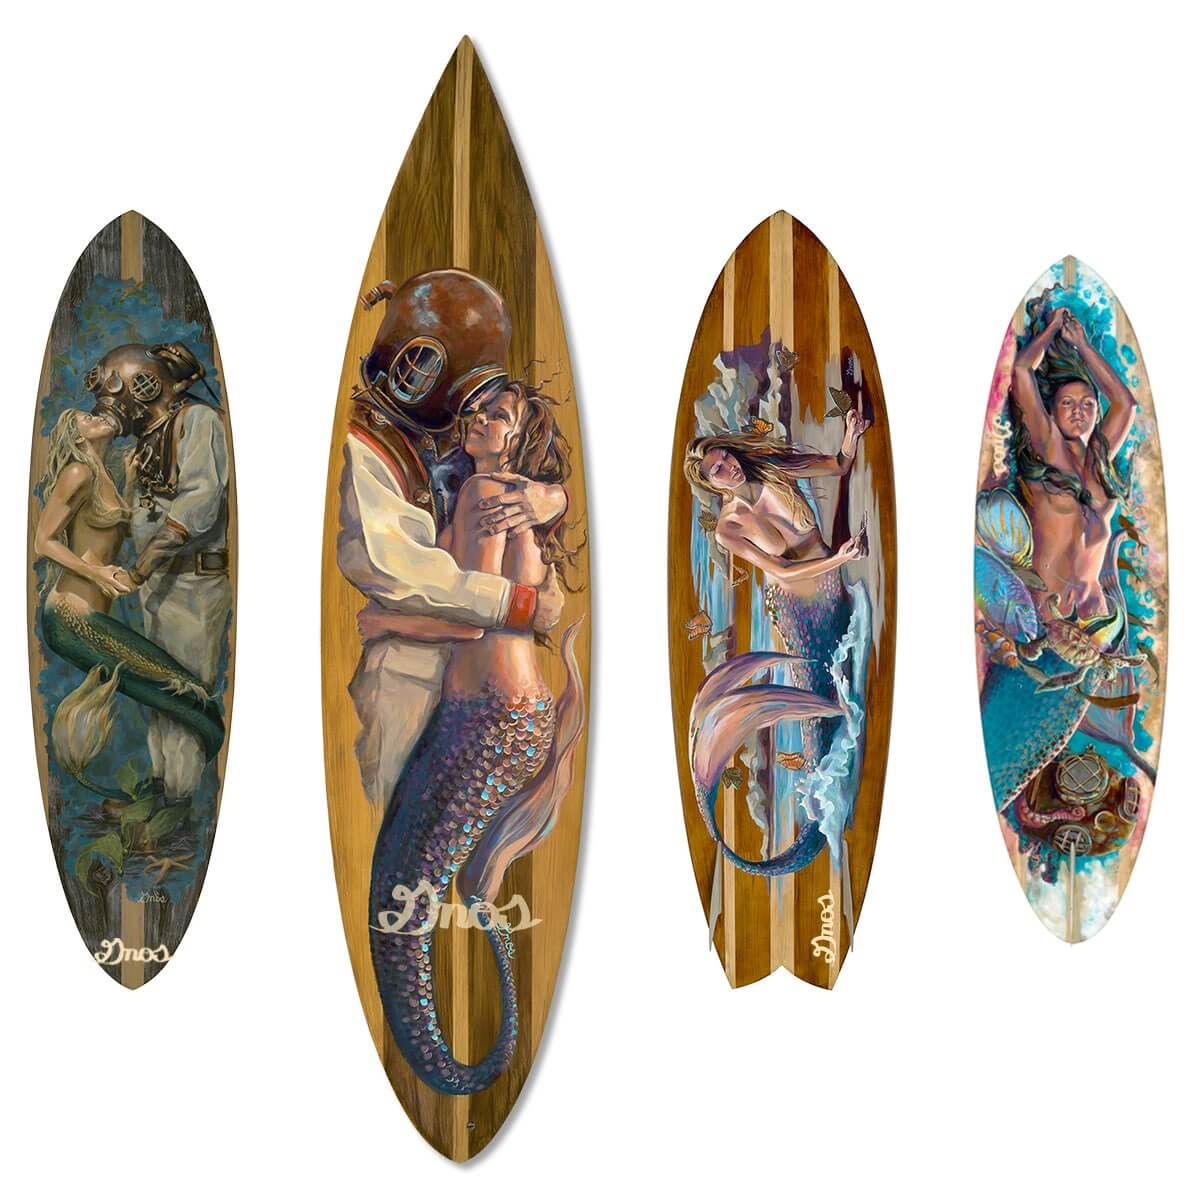 Surfboard art by Colleen Gnos